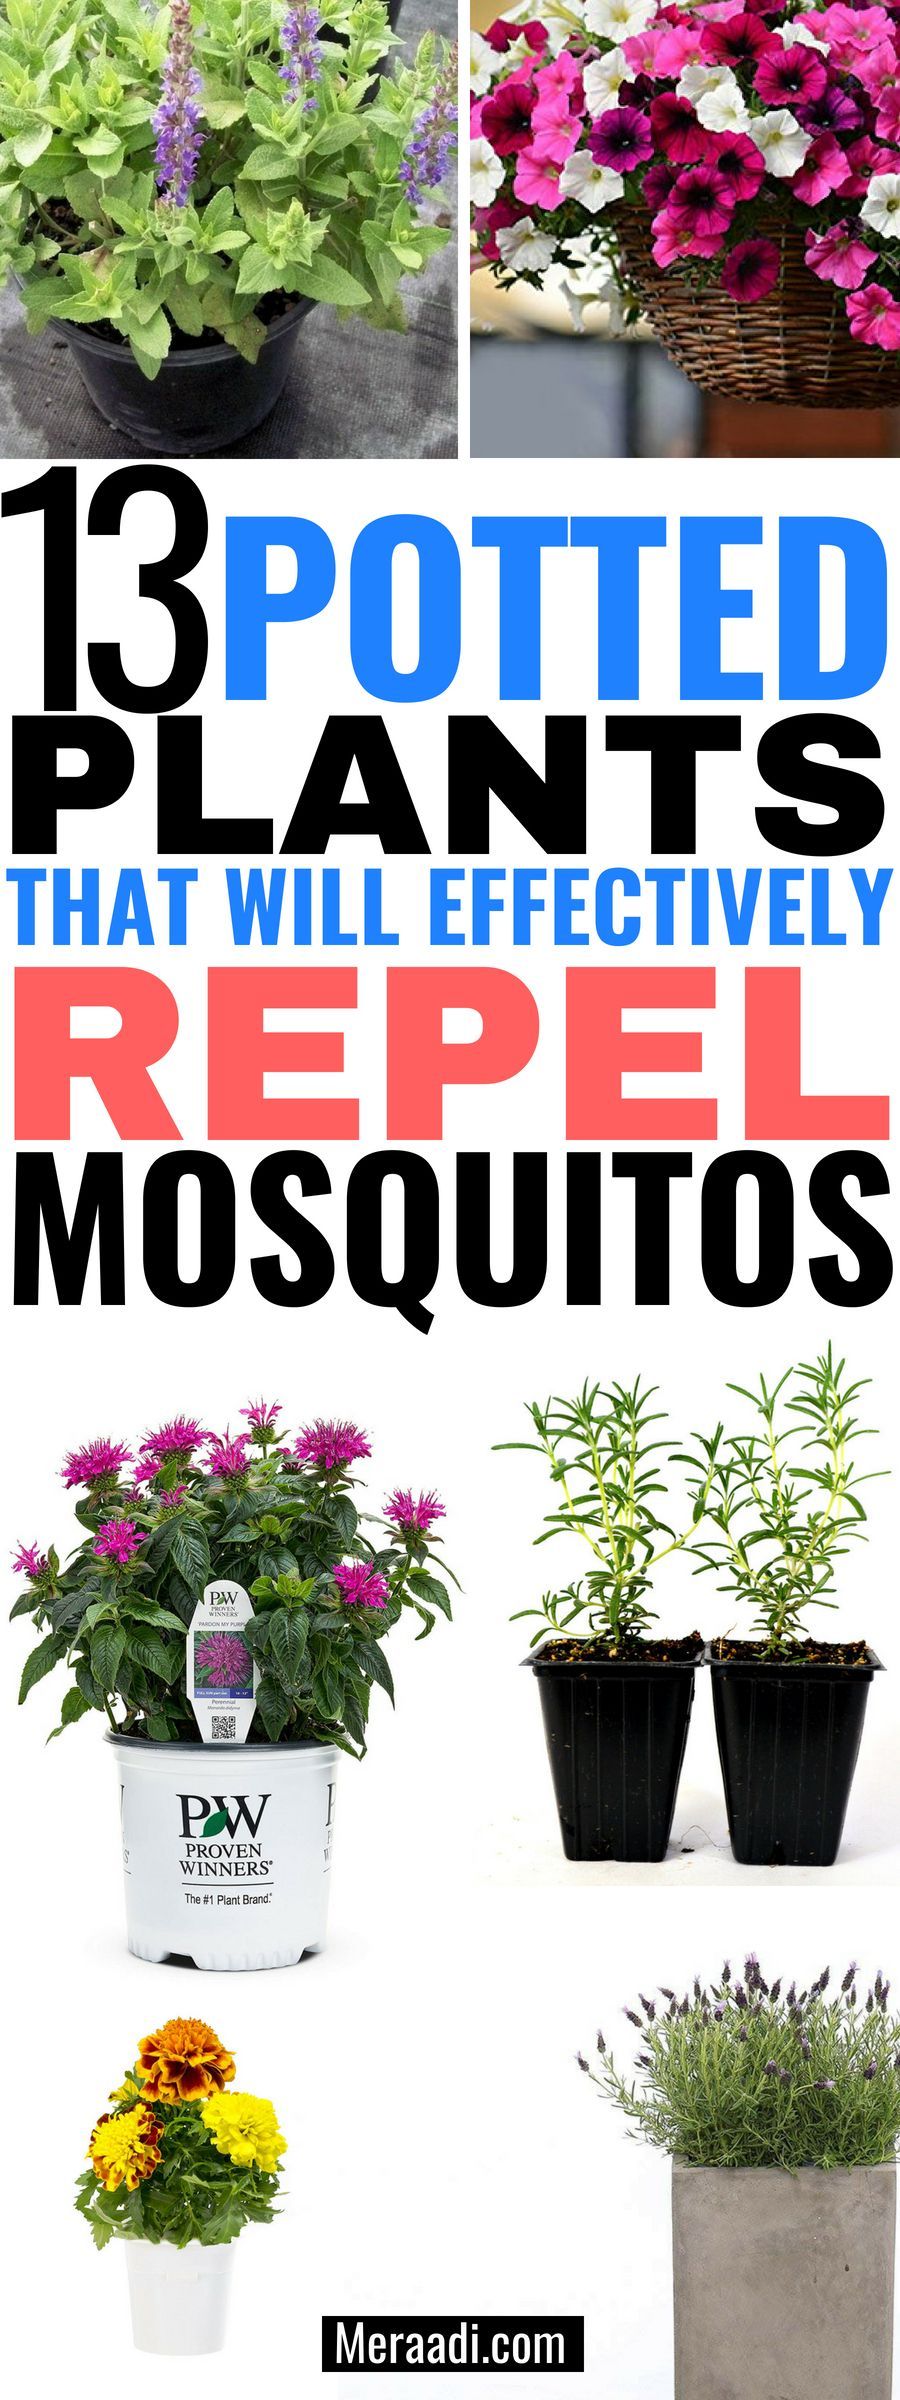 13 Potted Plants That Repel Mosquitos -   21 plants Potted tips ideas